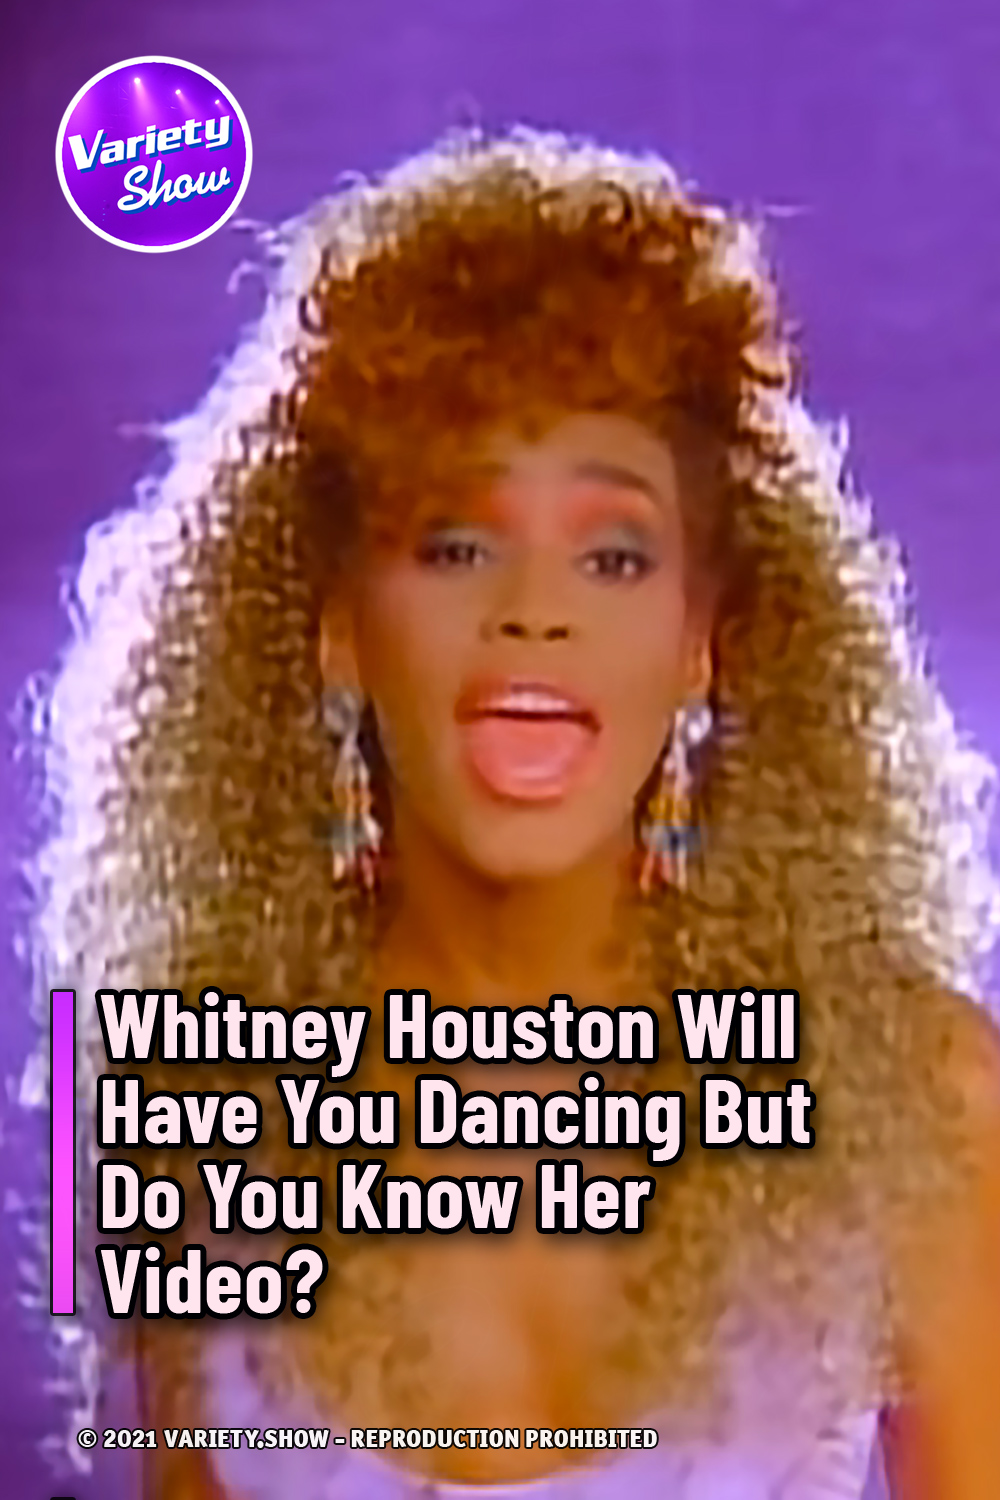 Whitney Houston Will Have You Dancing But Do You Know Her Video?